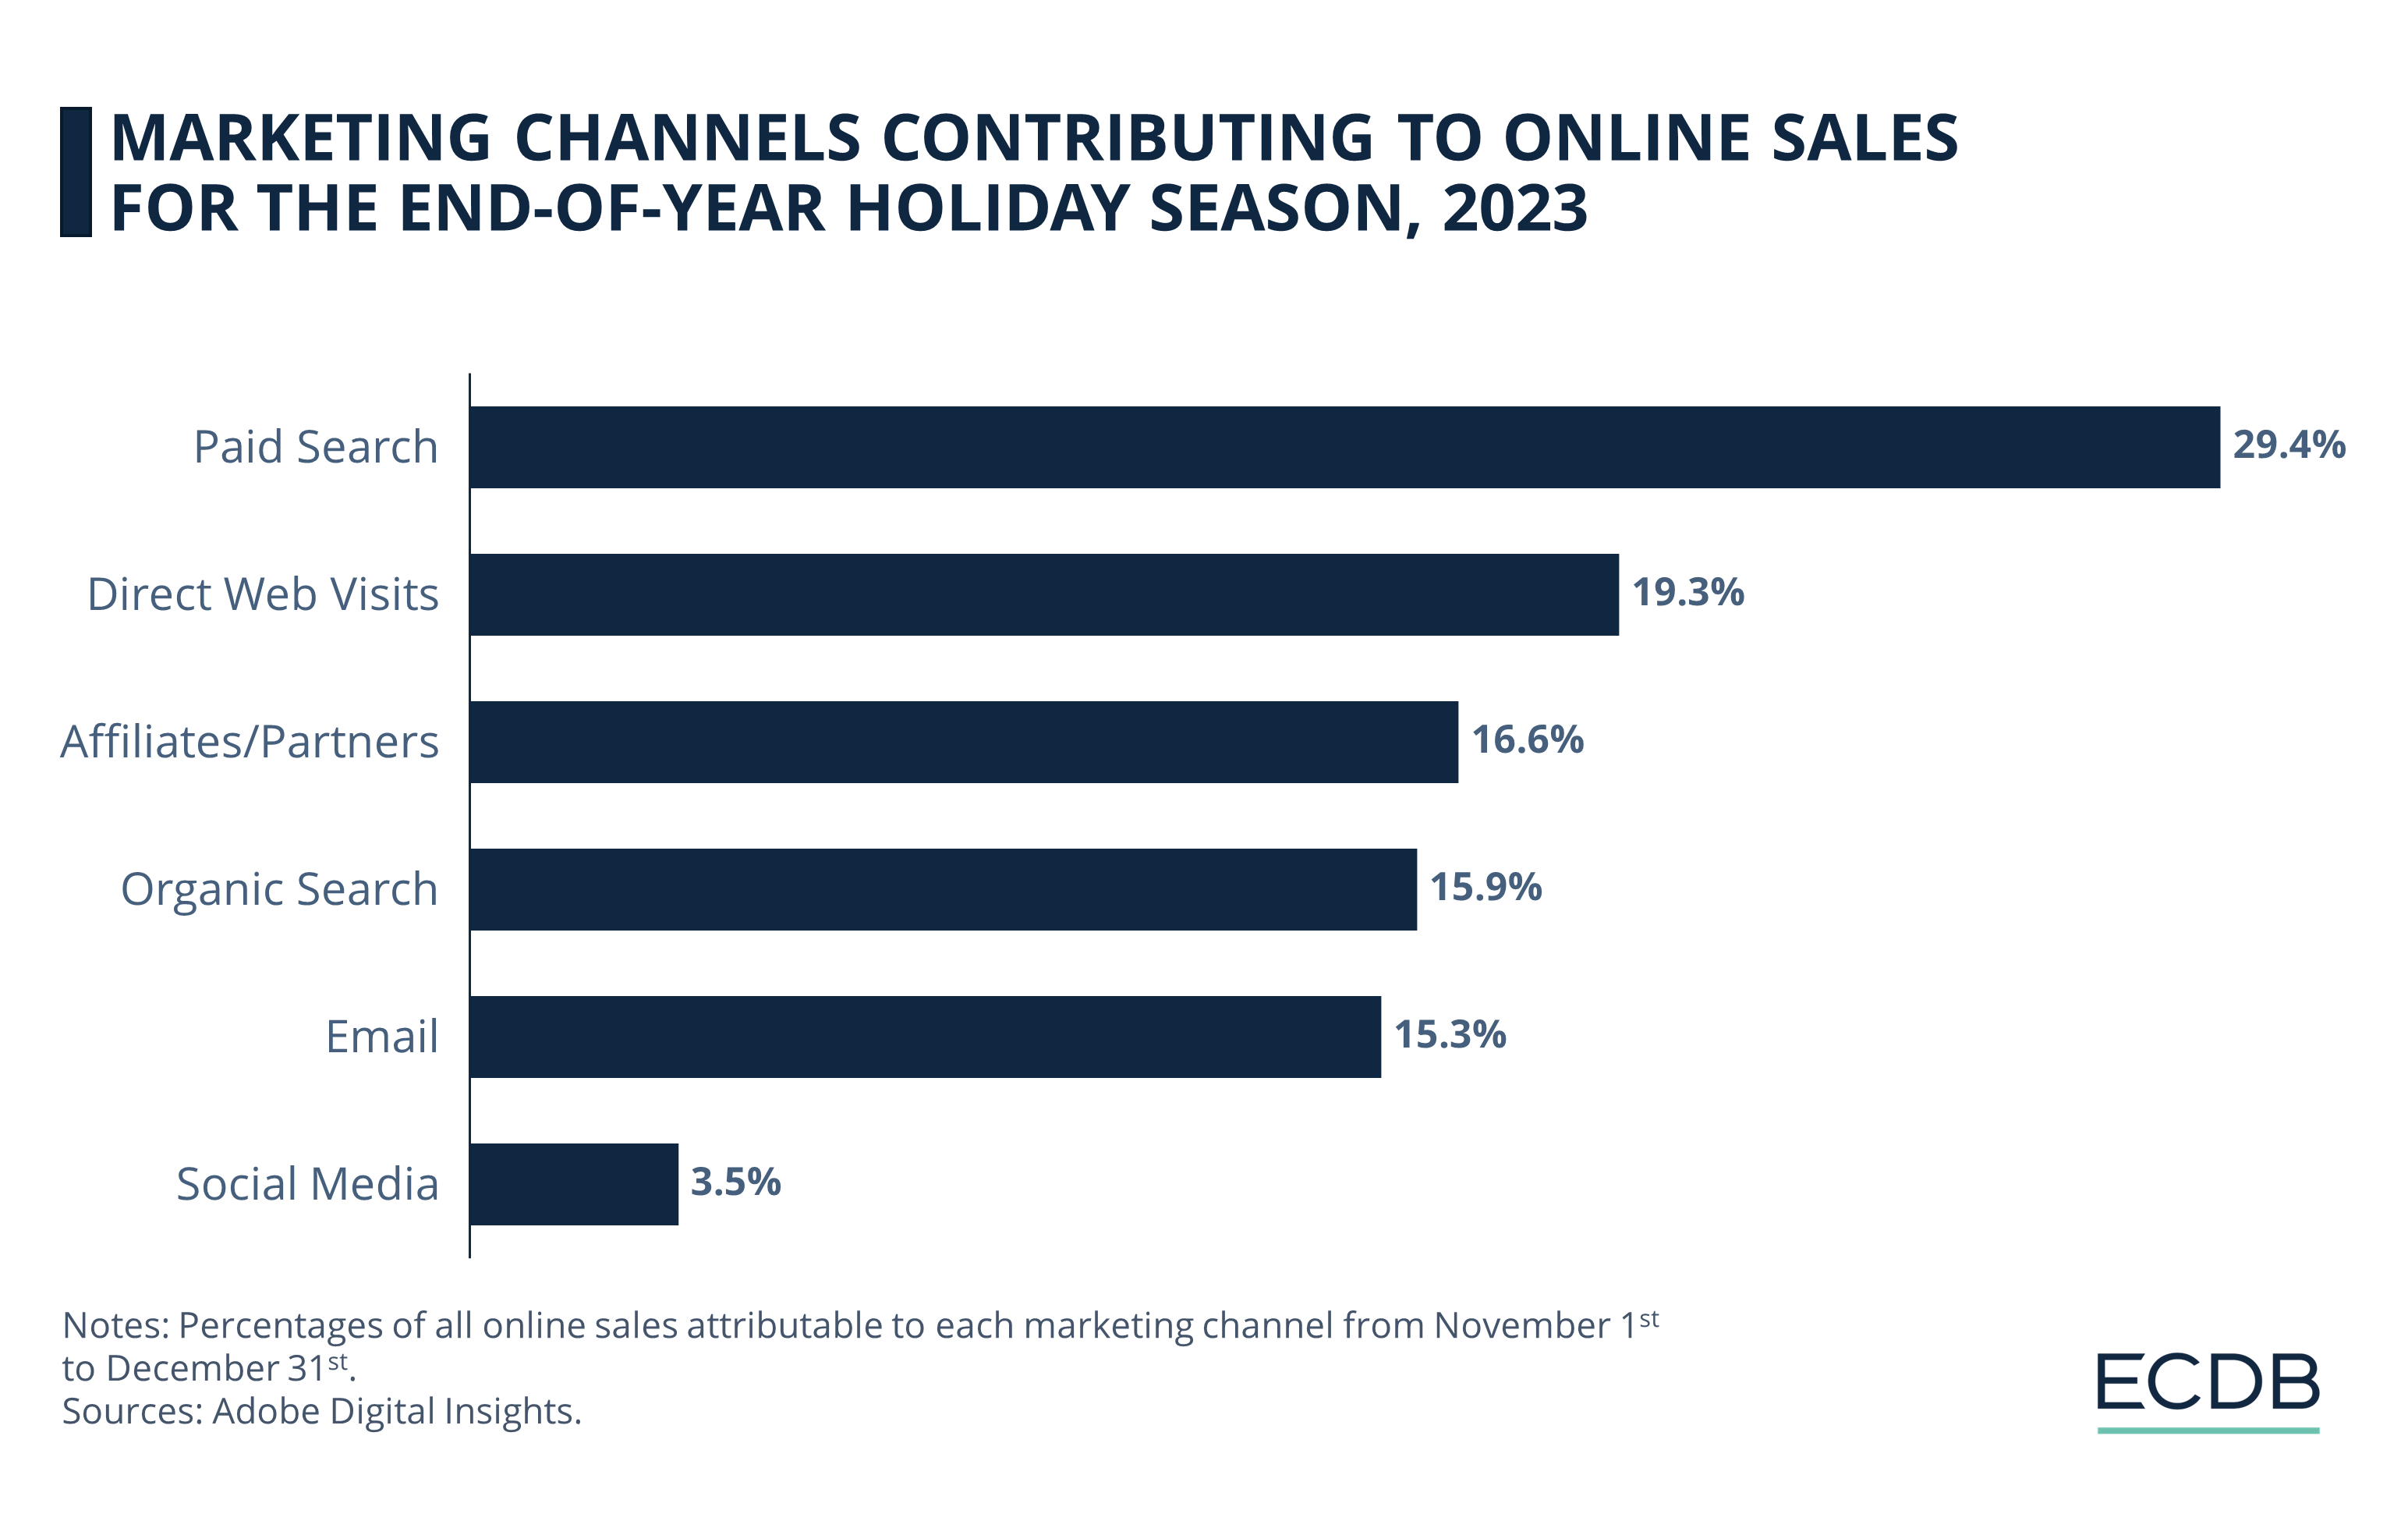 Marketing Channels Contributing to Online Sales of the End-of-the-Year Holiday Season, 2023